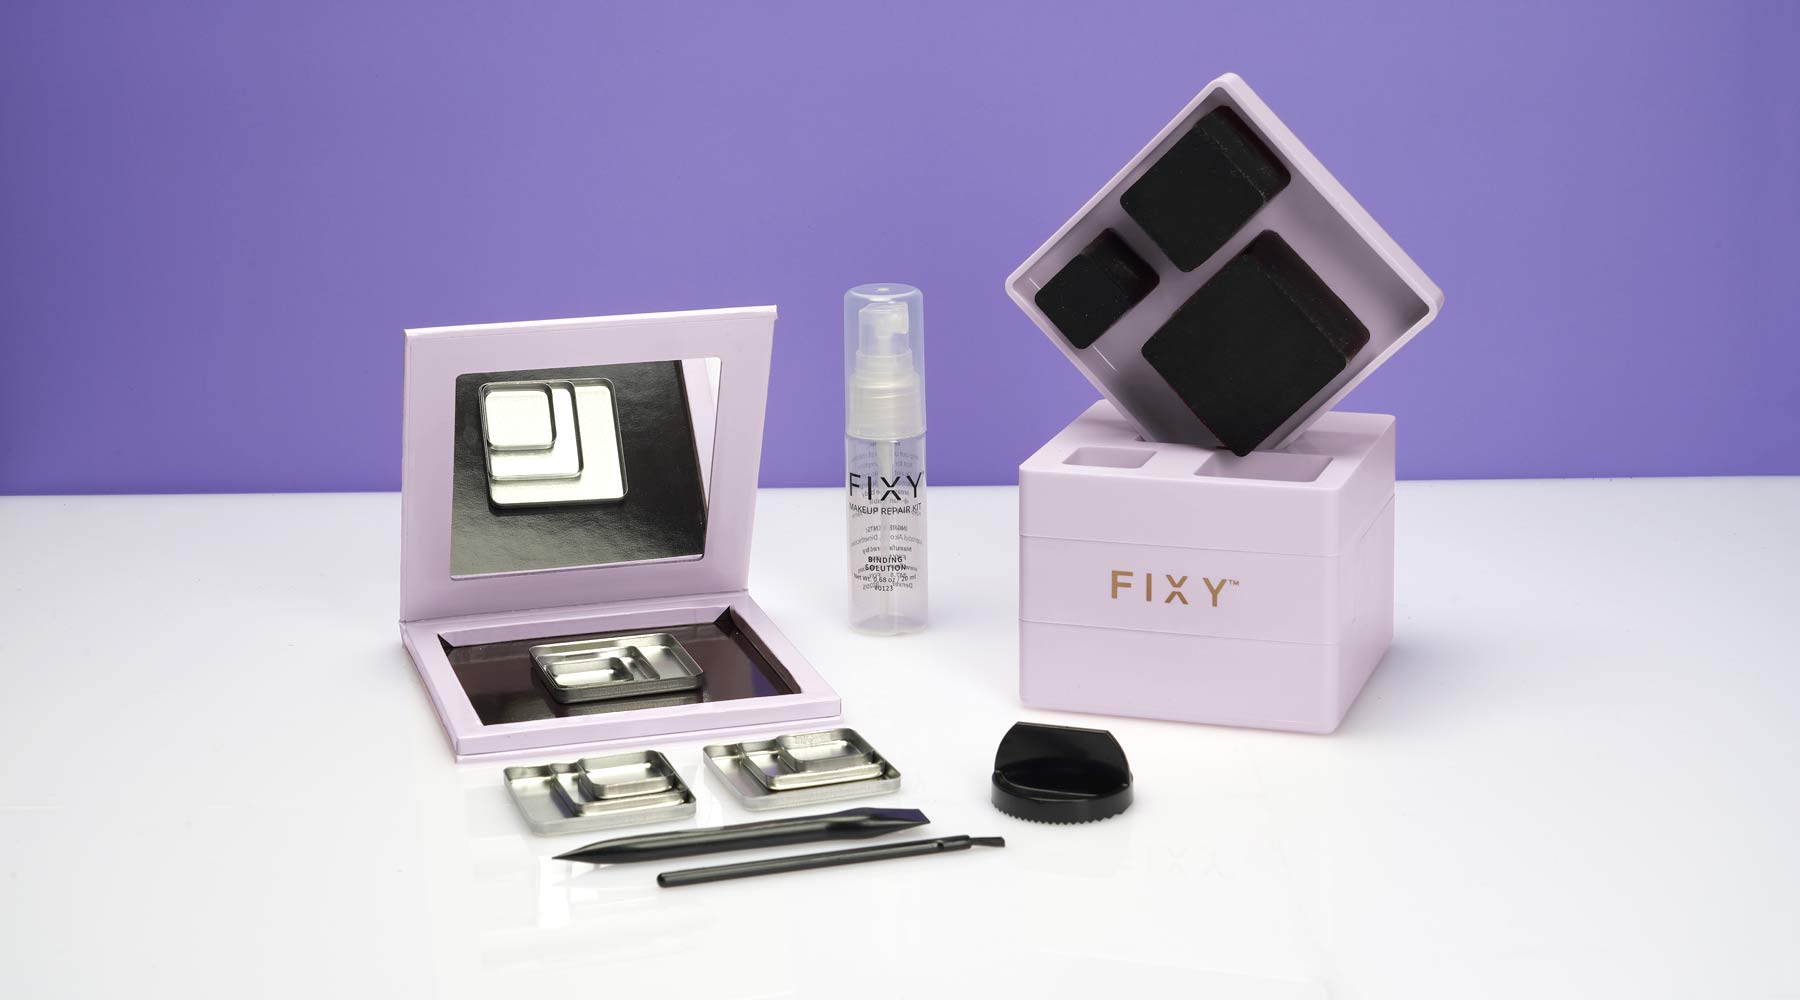 The FIXY Makeup Square Broken Makeup Repressing Kit including a makeup press, FIXY binding spray, grinder, tools, with empty magnetic palette and 10 pans